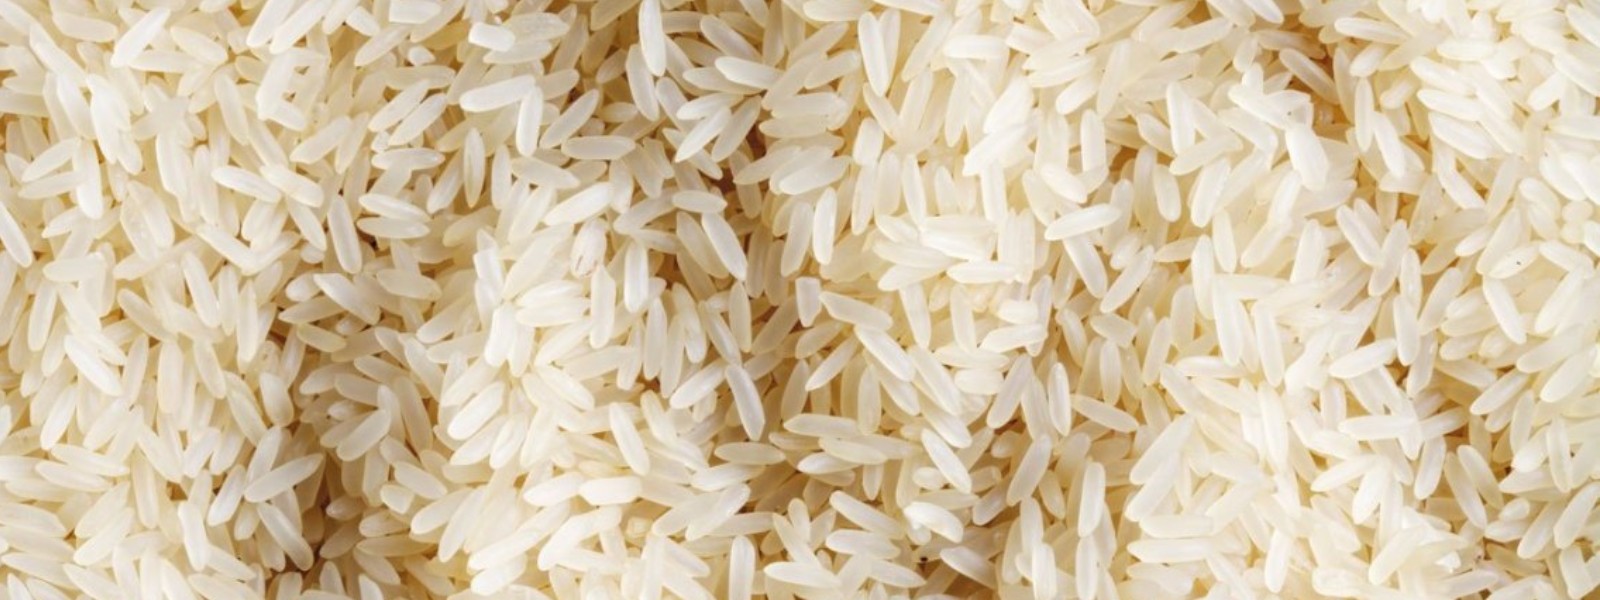 Traders can face up to Rs. 500,000 in fines & 6 months in prison for selling rice at high prices